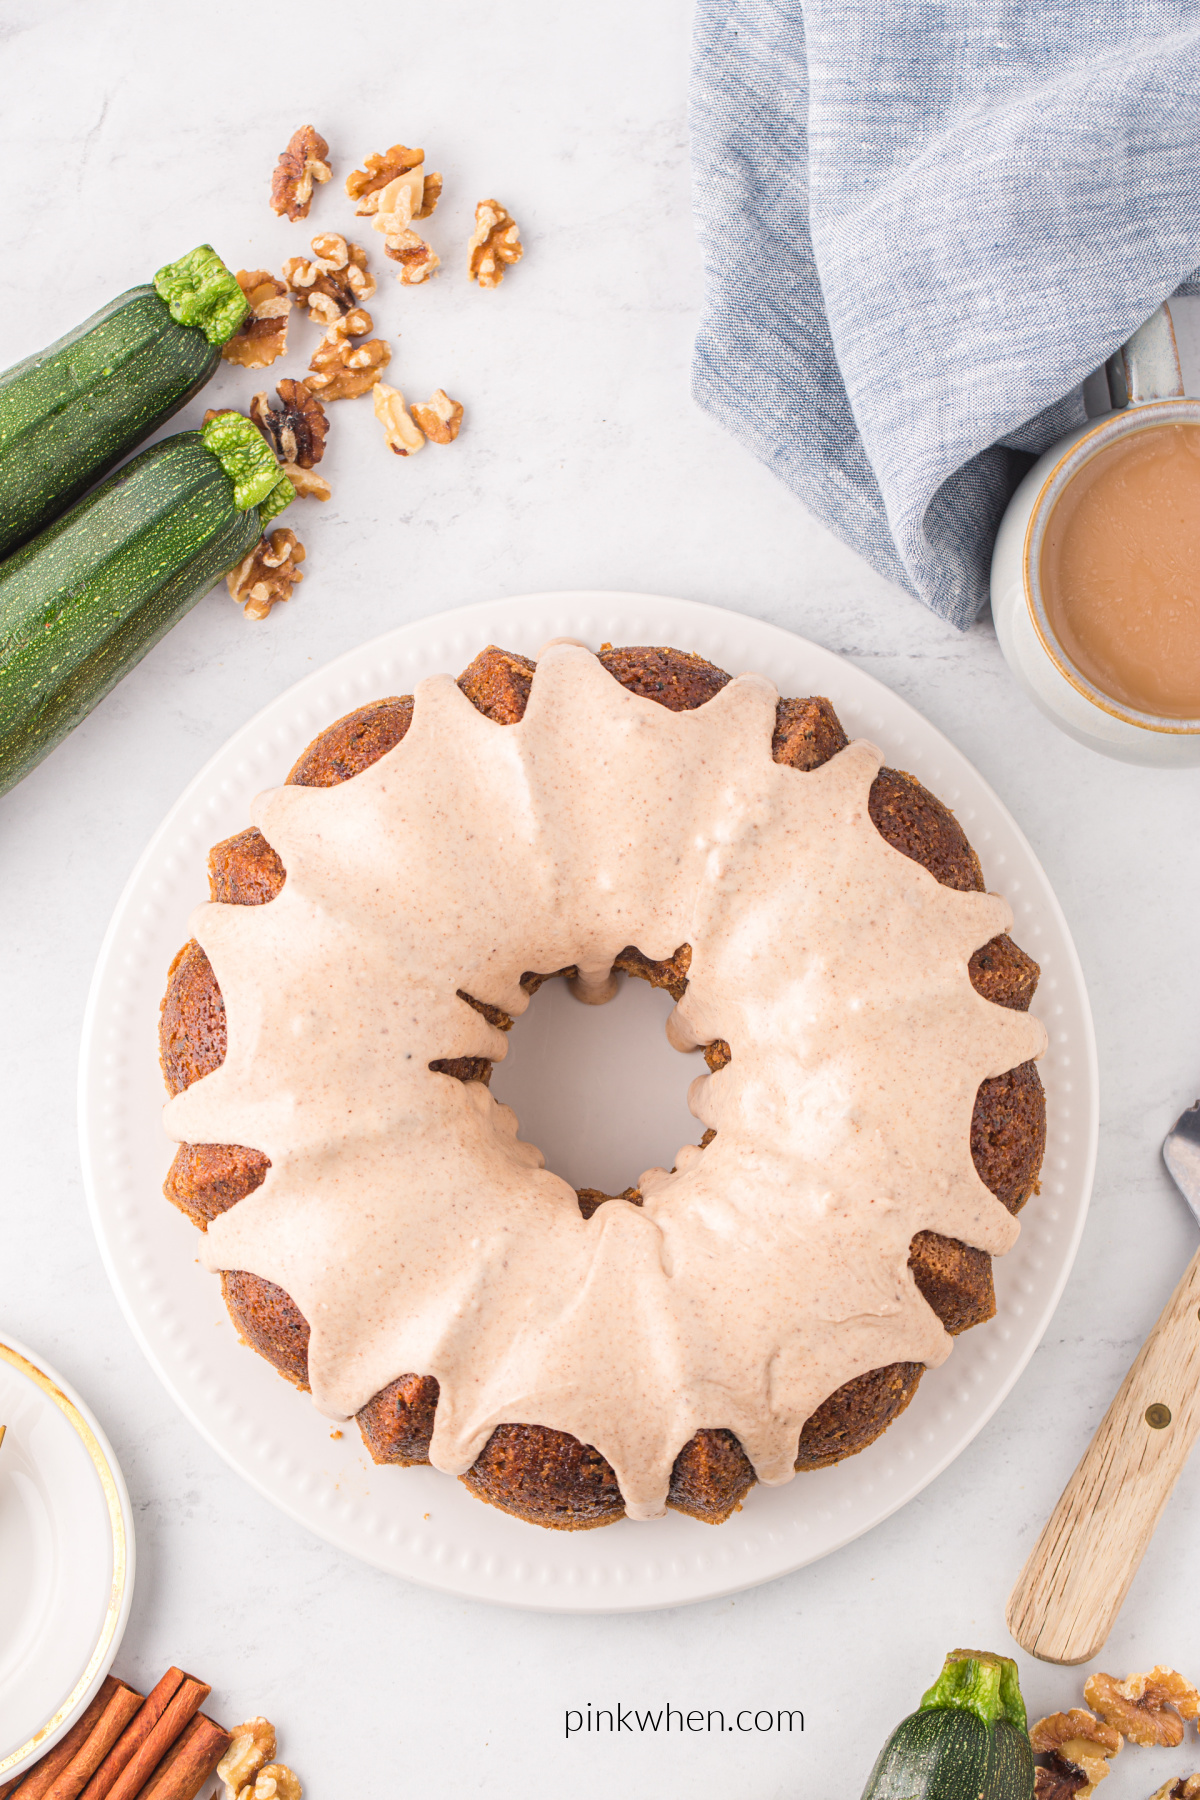 Zucchini bundt cake with icing drizzled over the top.